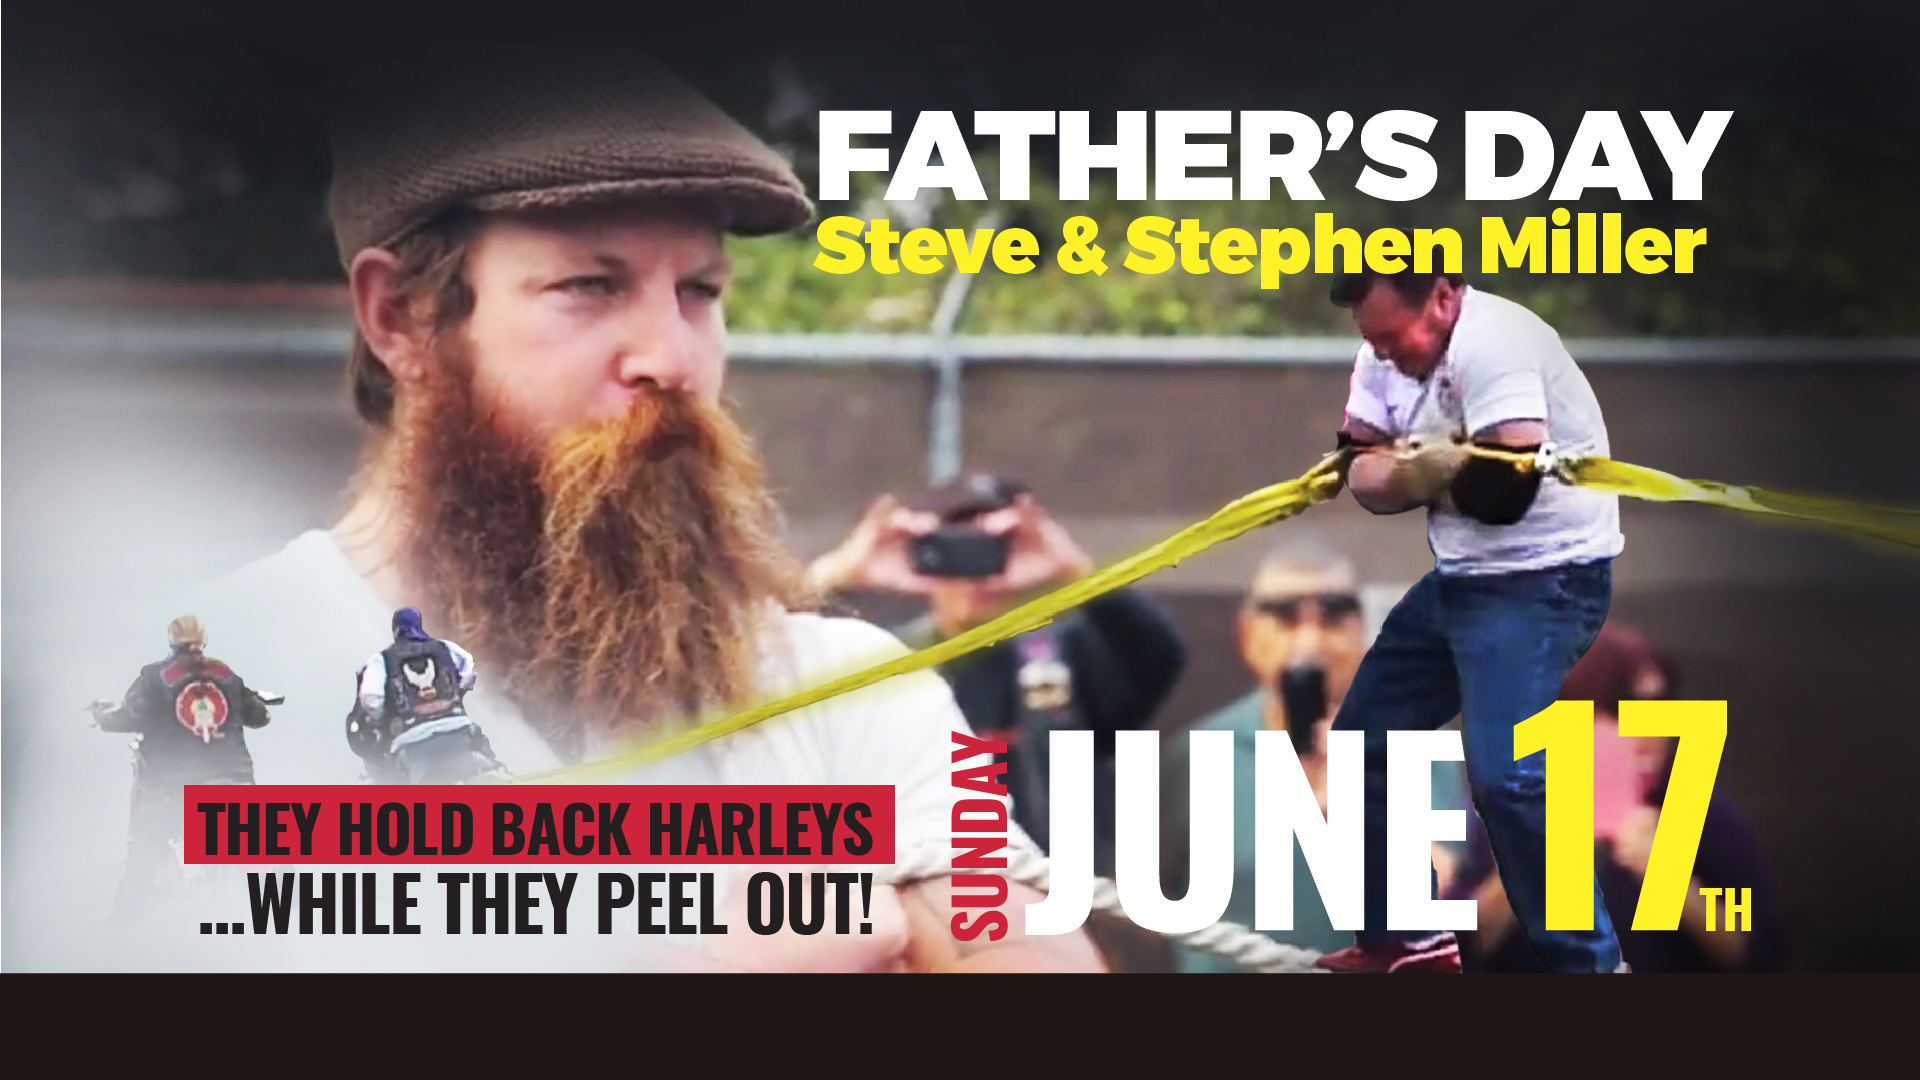 World Record Setting Father's Day Event Featuring Strongmen as seen on "Ripley's Believe It or Not!"